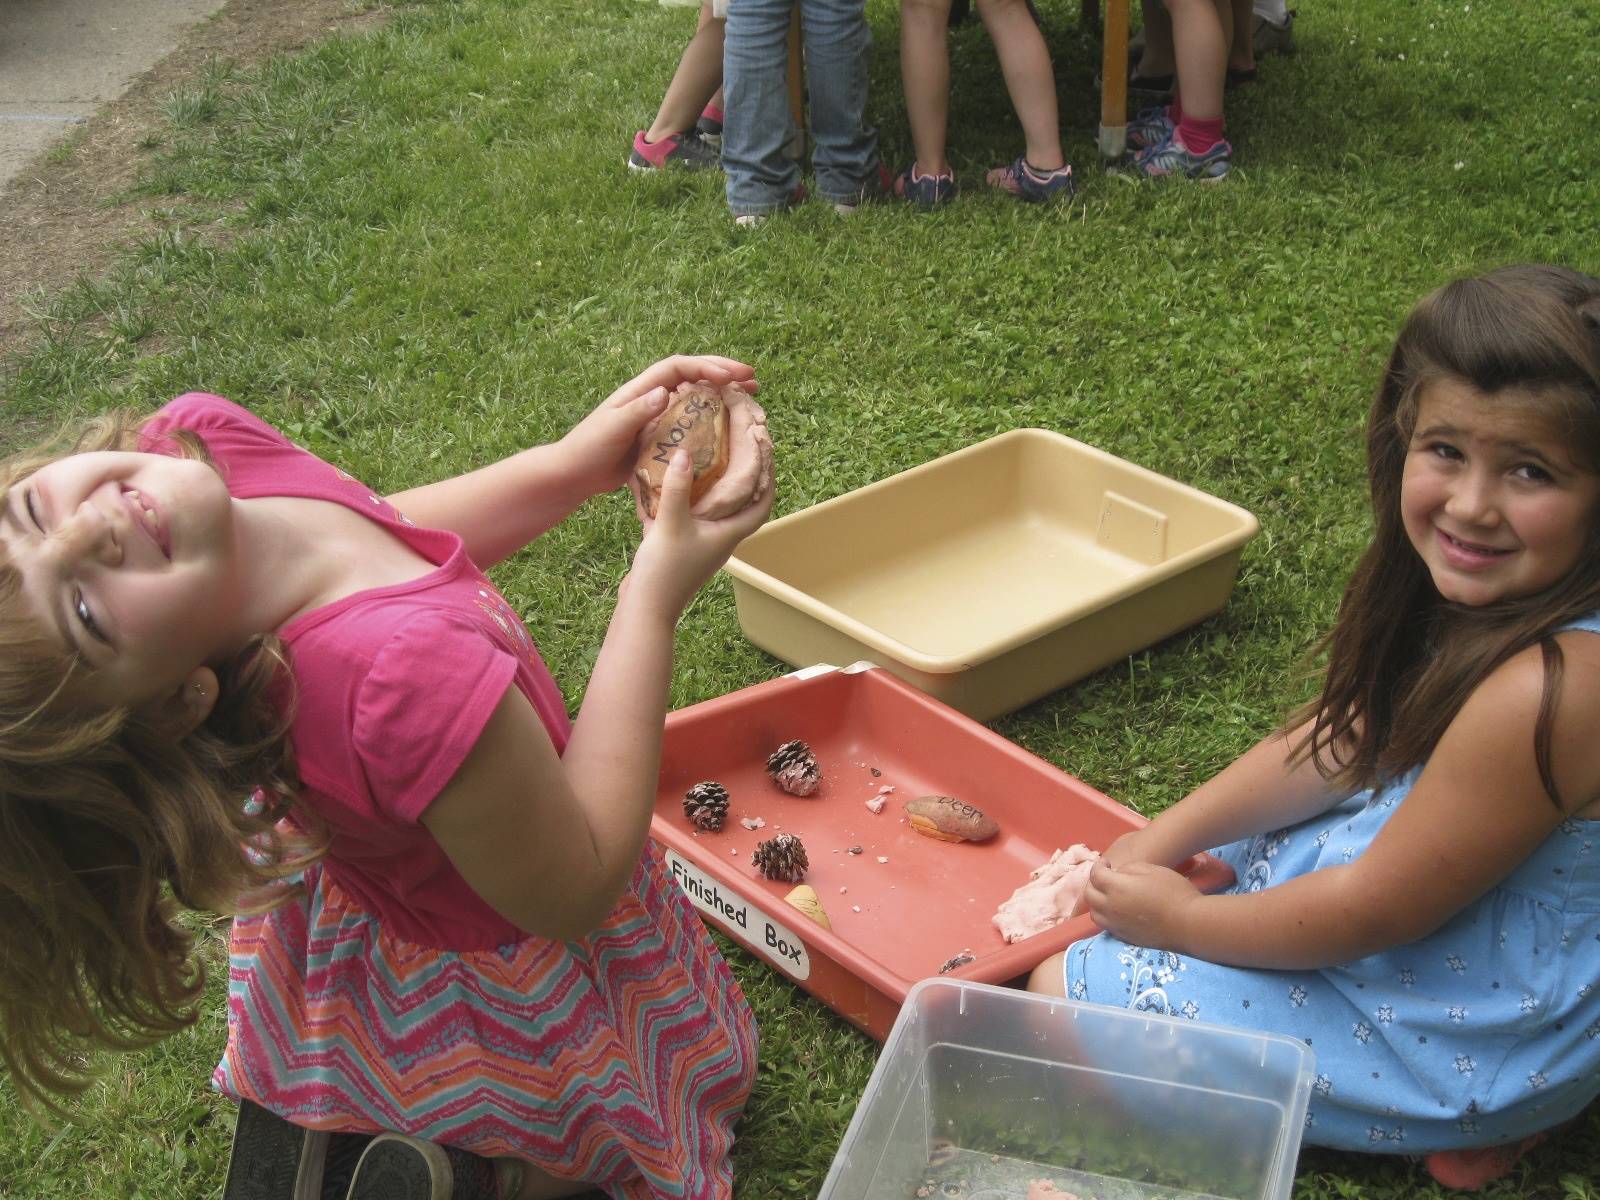 2 students smile as the play with bugs.